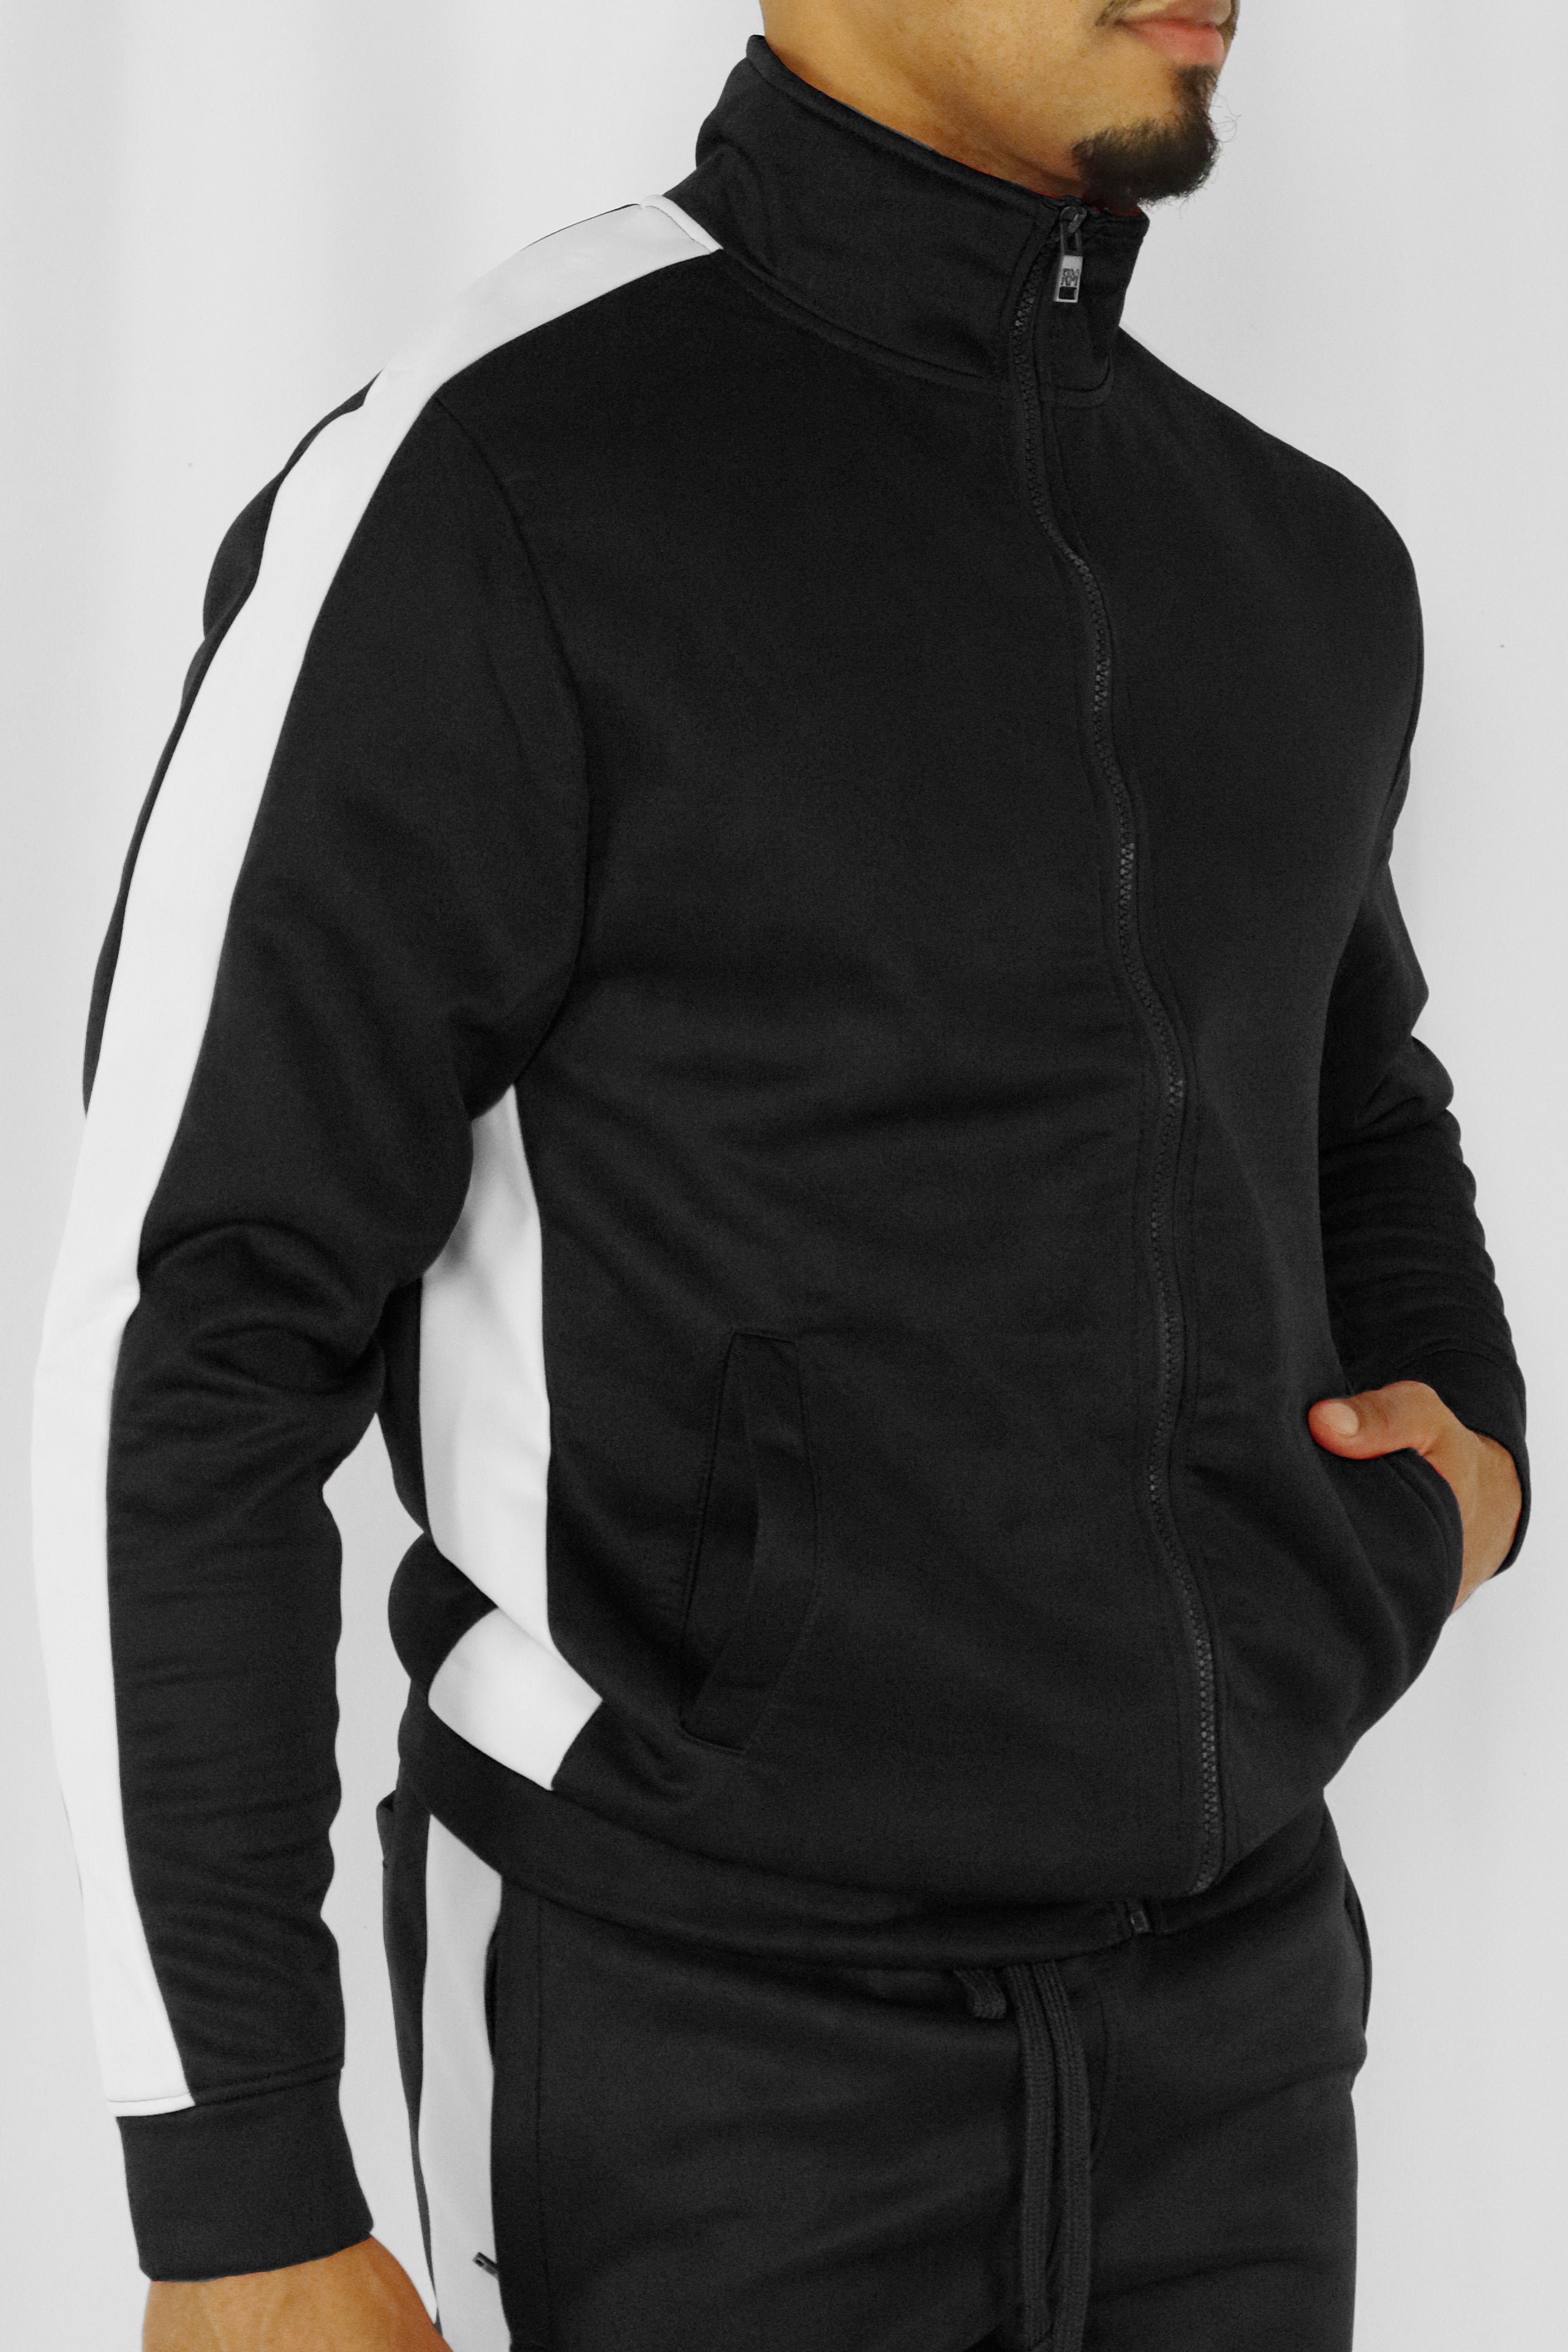 Turaag Active - Introducing our Urban Edge Full Zip-up Jacket - sleek,  flexible, and perfect for urban adventures. Crafted from lightweight,  stretchy material, it offers superior flexibility for an active lifestyle.  With